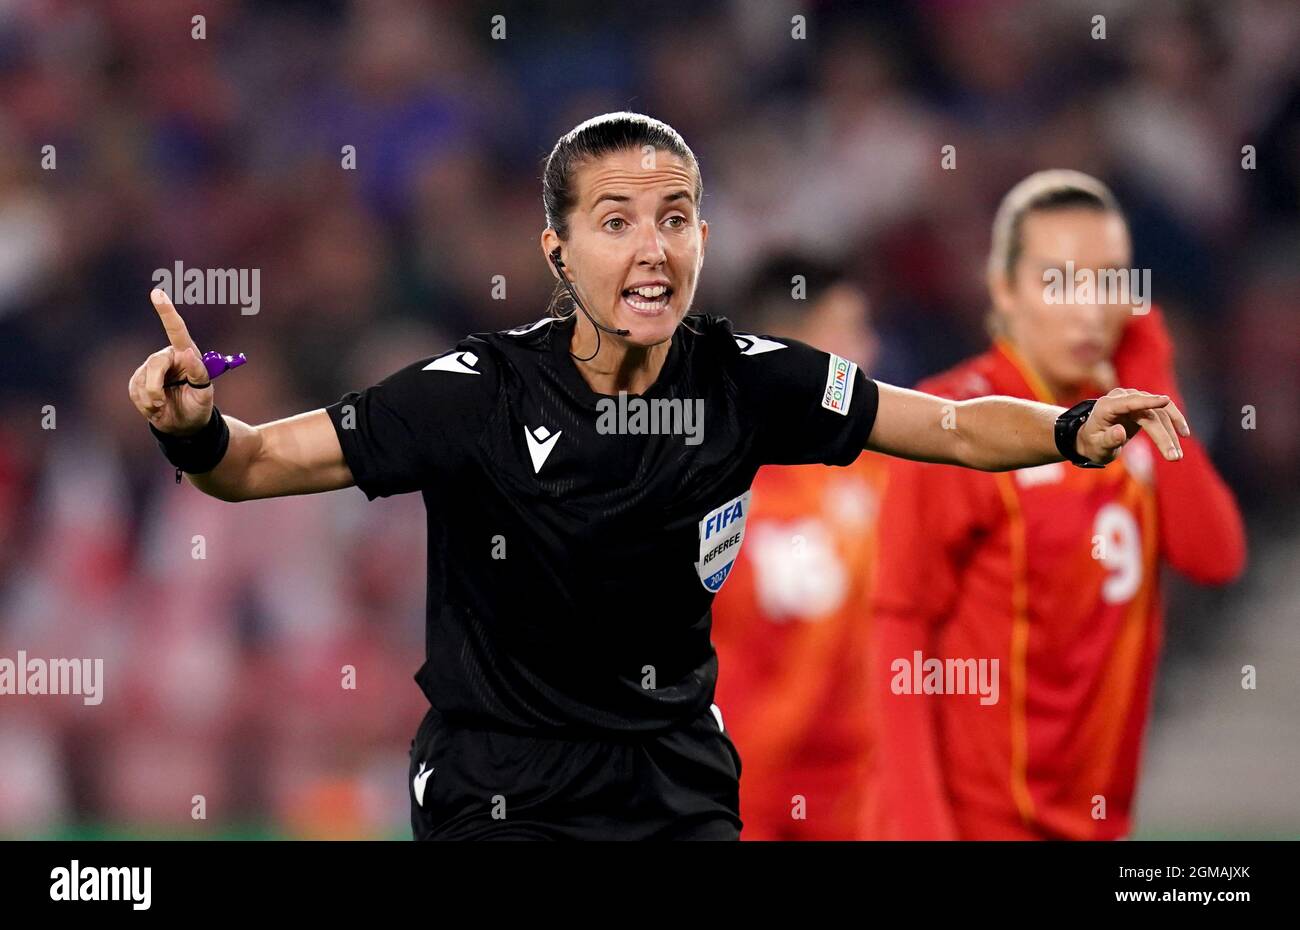 Referee María Dolores Martínez Madrona during the UEFA Qualifier match at St Mary's, Southampton. Picture date: Friday September 17, 2021. See PA story SOCCER England Women. Photo credit should read: John Walton/PA Wire. RESTRICTIONS: Use subject to restrictions. Editorial use only, no commercial use without prior consent from rights holder. Stock Photo